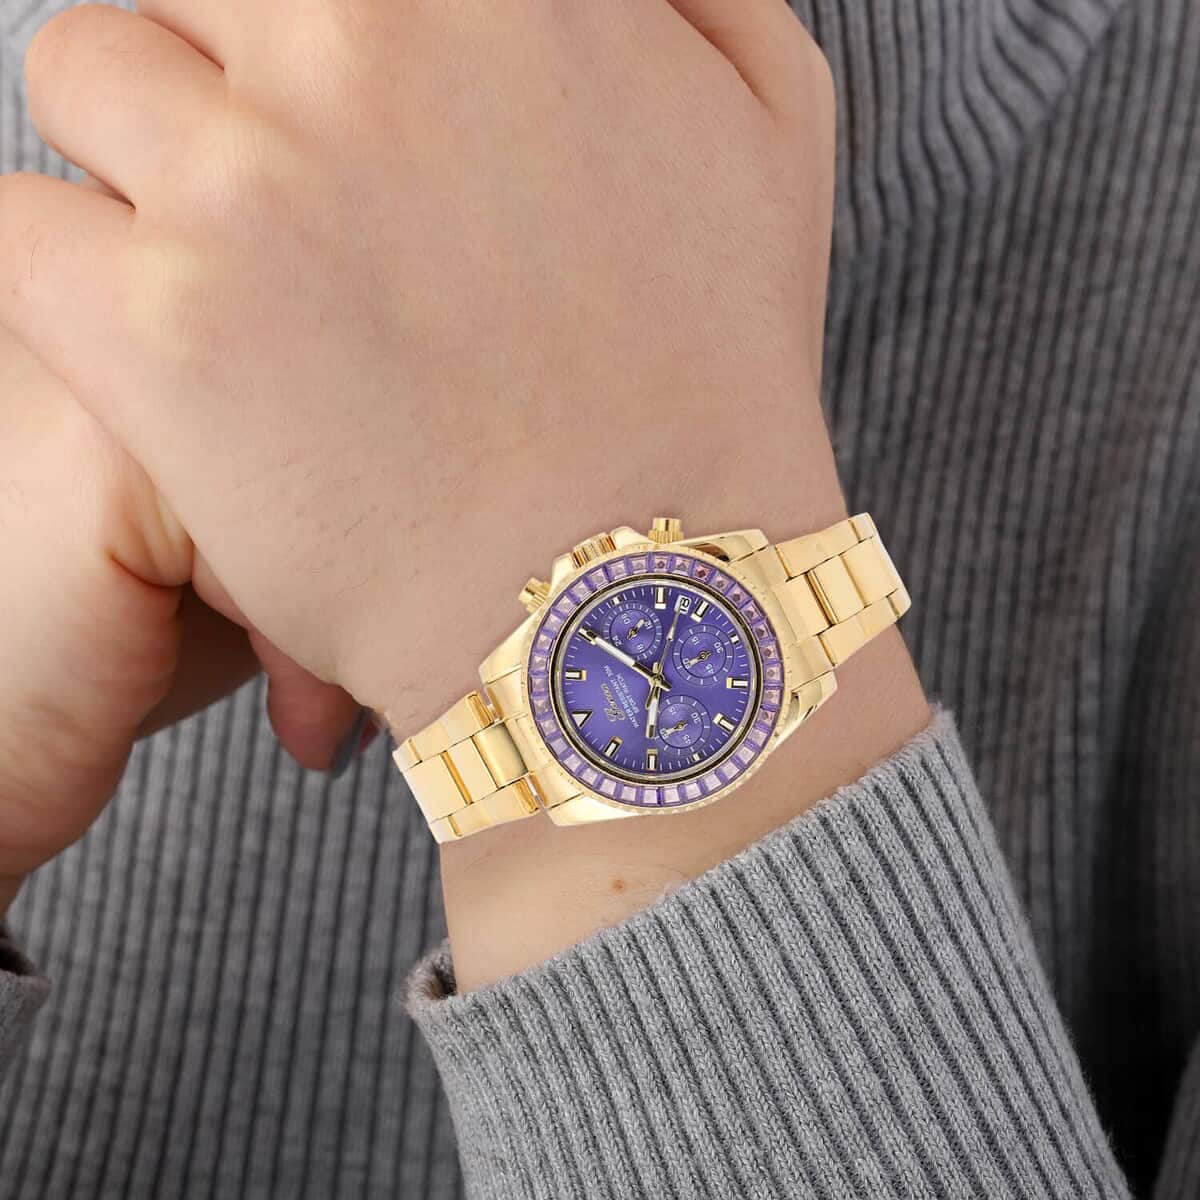 Genoa Finest Purple CZ Multi-Function Movement Watch, ION Plated Yellow Gold Stainless Steel Watch, Formal Bracelet Watch, Best Everyday Luxury Minimal Women's Watch, Analogue Watches 38mm 5.75 ctw image number 2